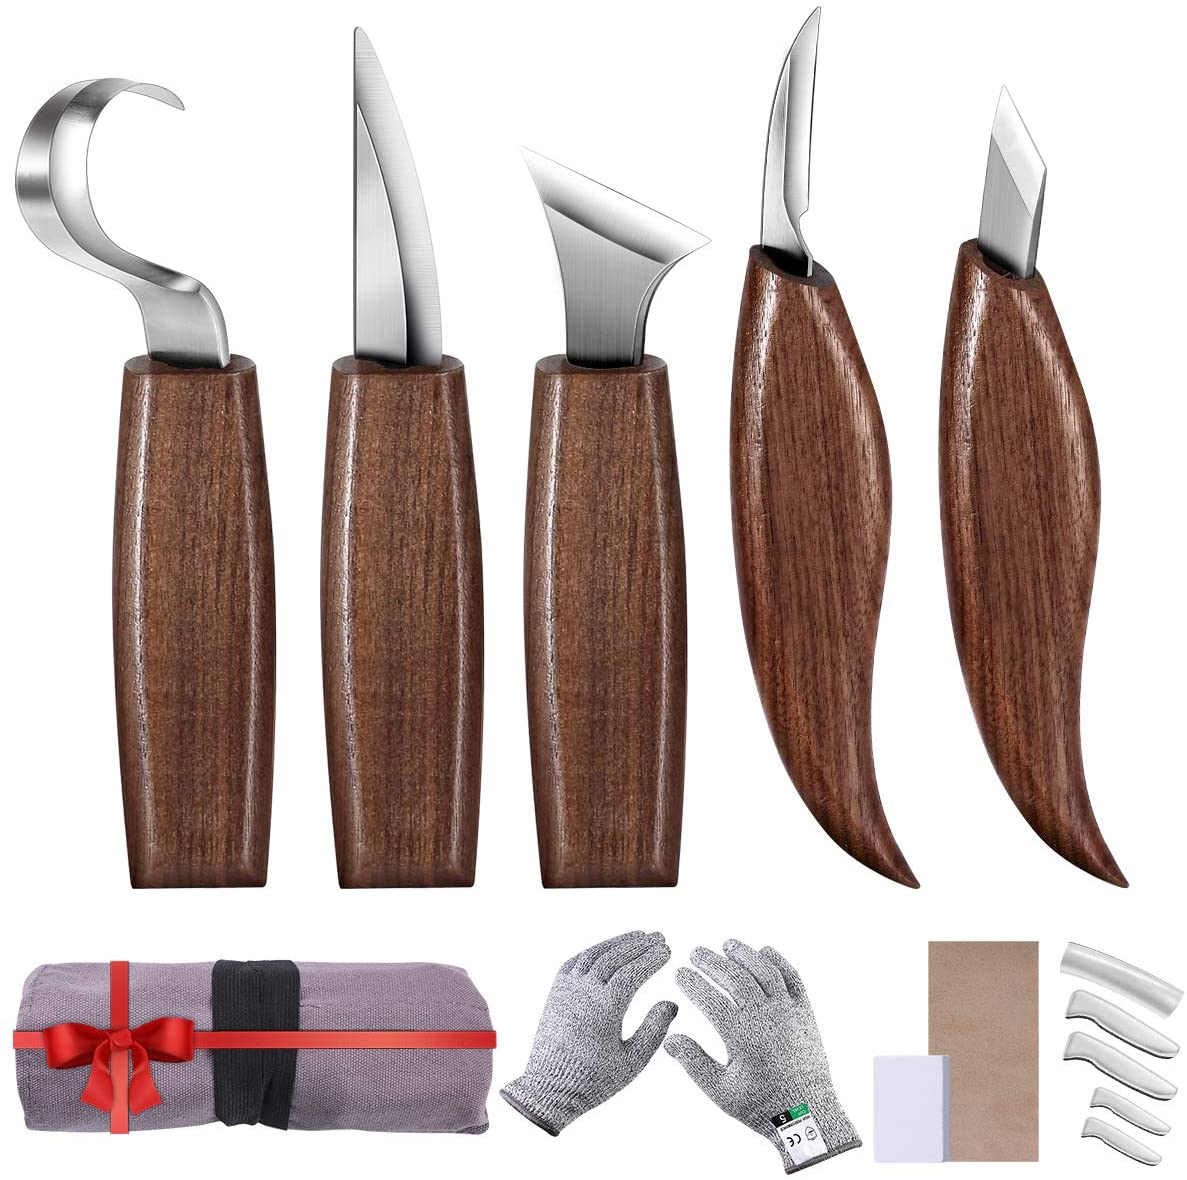 Puimentiua Wood Carving Tools Kit for Beginners